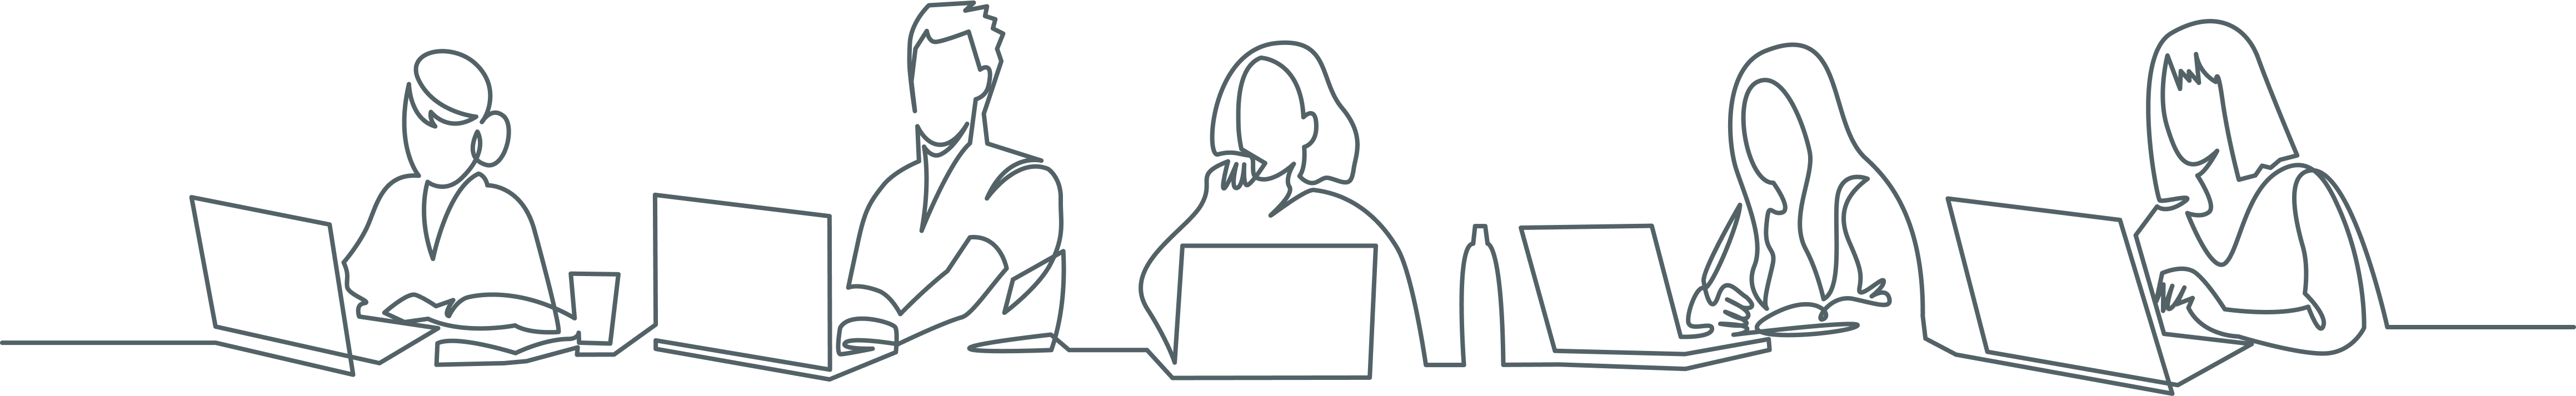 Line drawing of people sitting at laptops